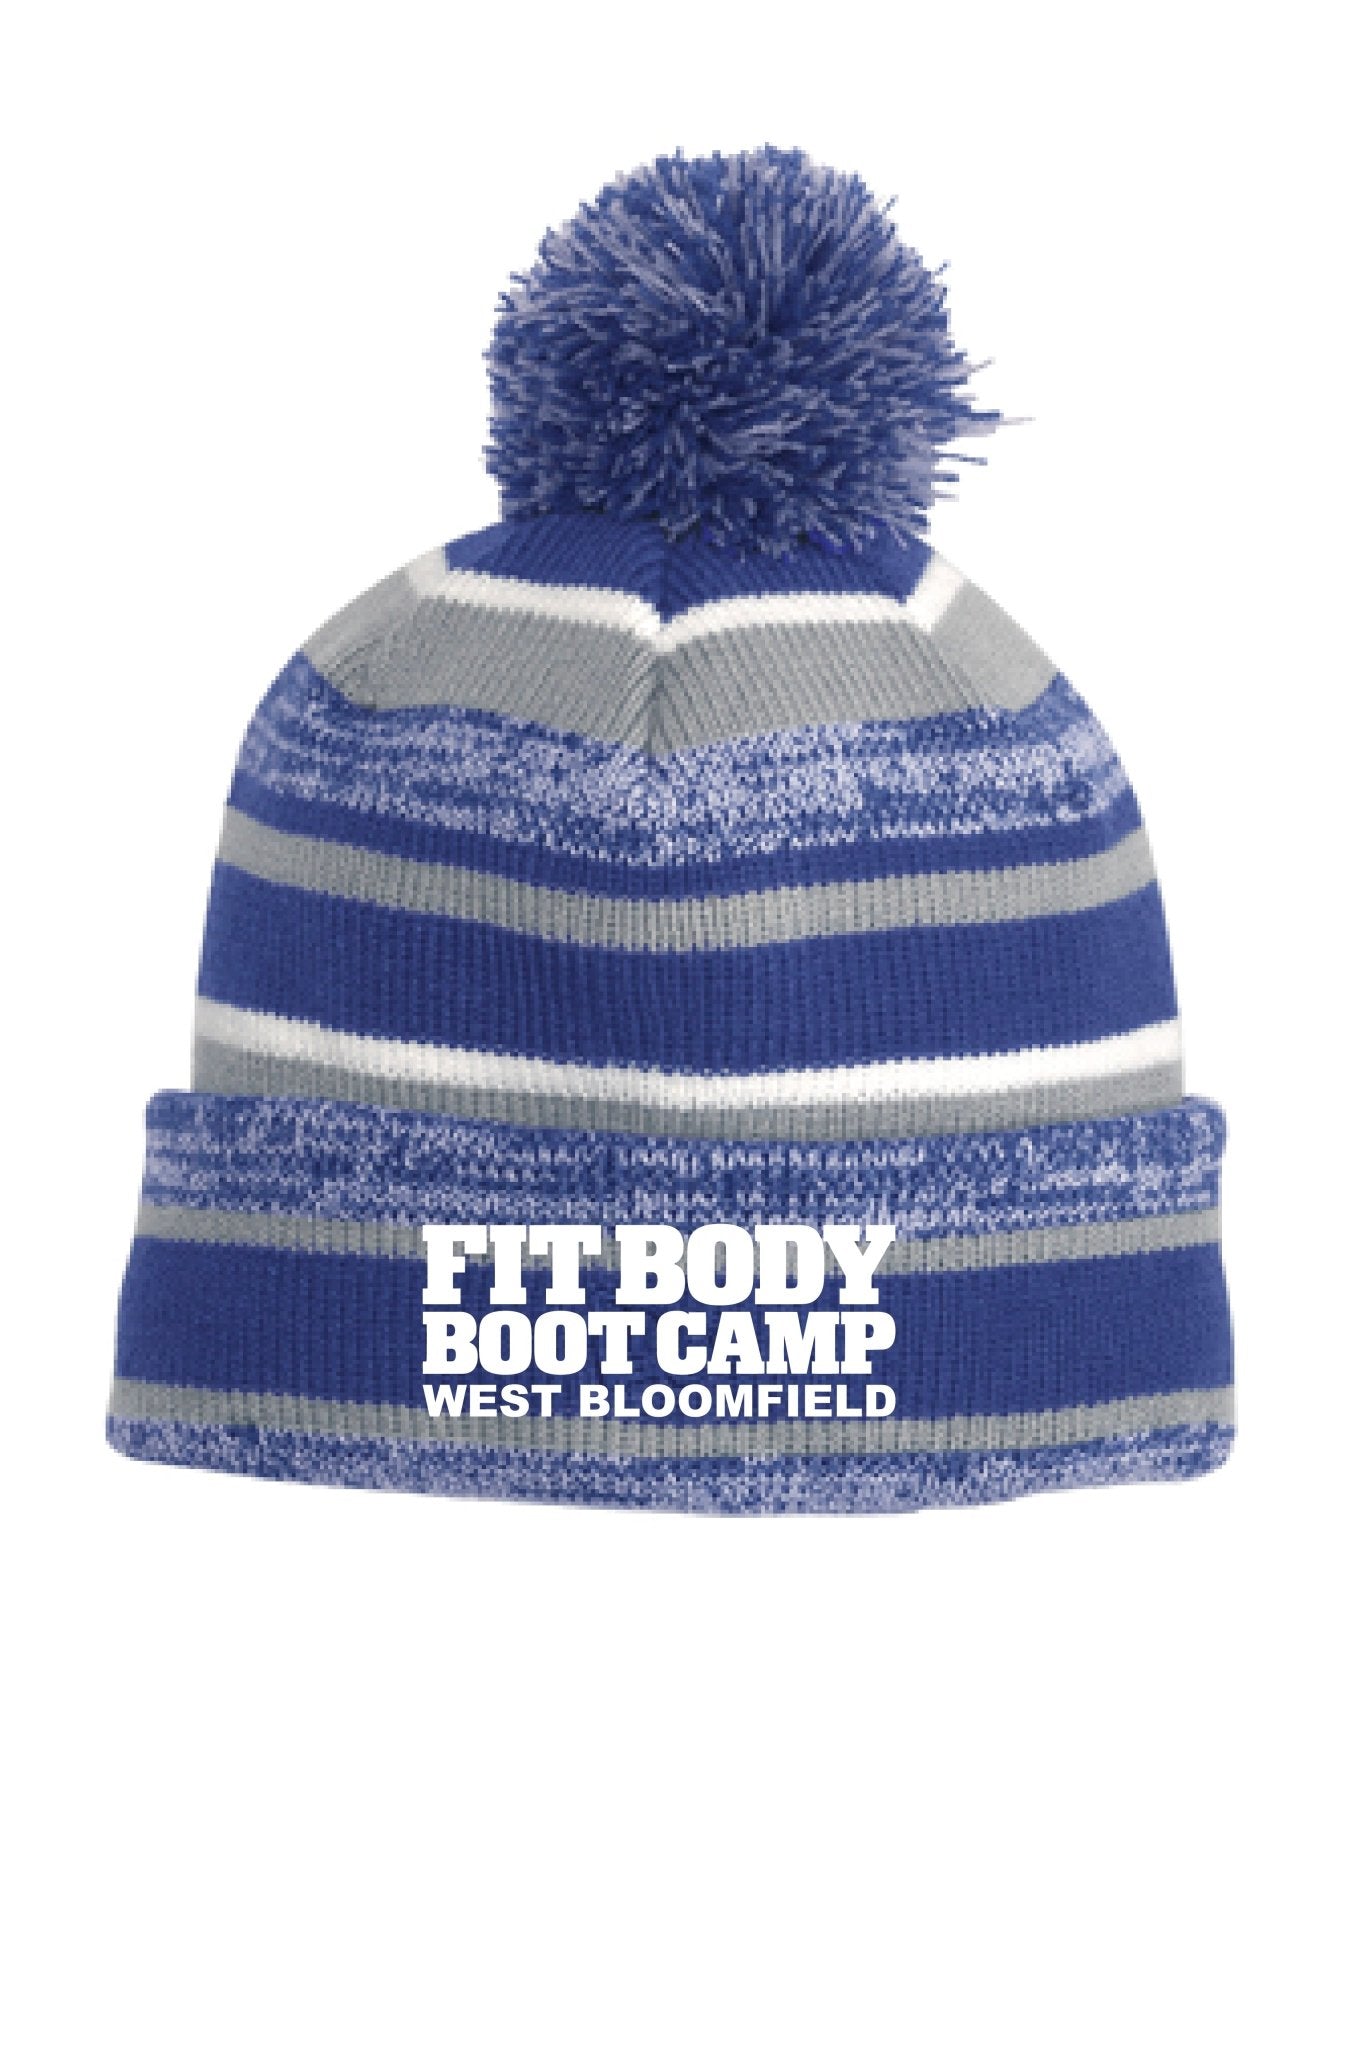 West Bloomfield Fit Body Boot Camp New Era Beanie - Mato & Hash